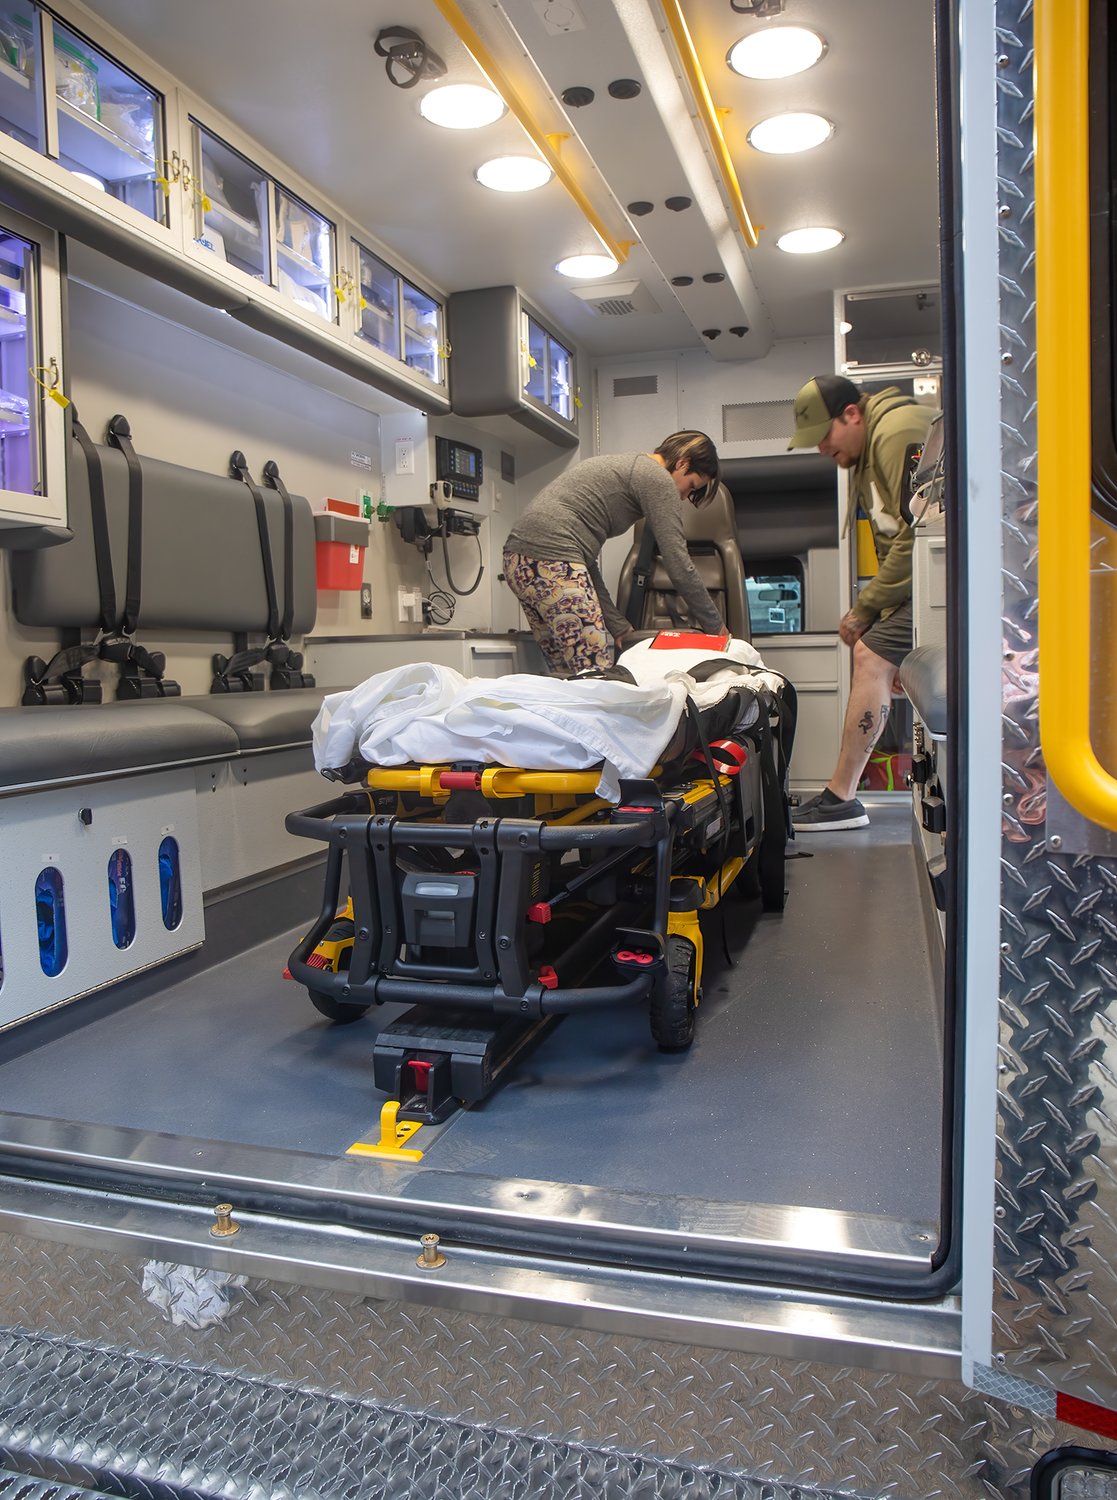 The extra room provided by half-depth supply cabinets creates more room to move for EMTs as they're attending patients. Clear Plexiglas and LED lighting provide a clear view of everything stowed in the cabinets for quick access to needed items.